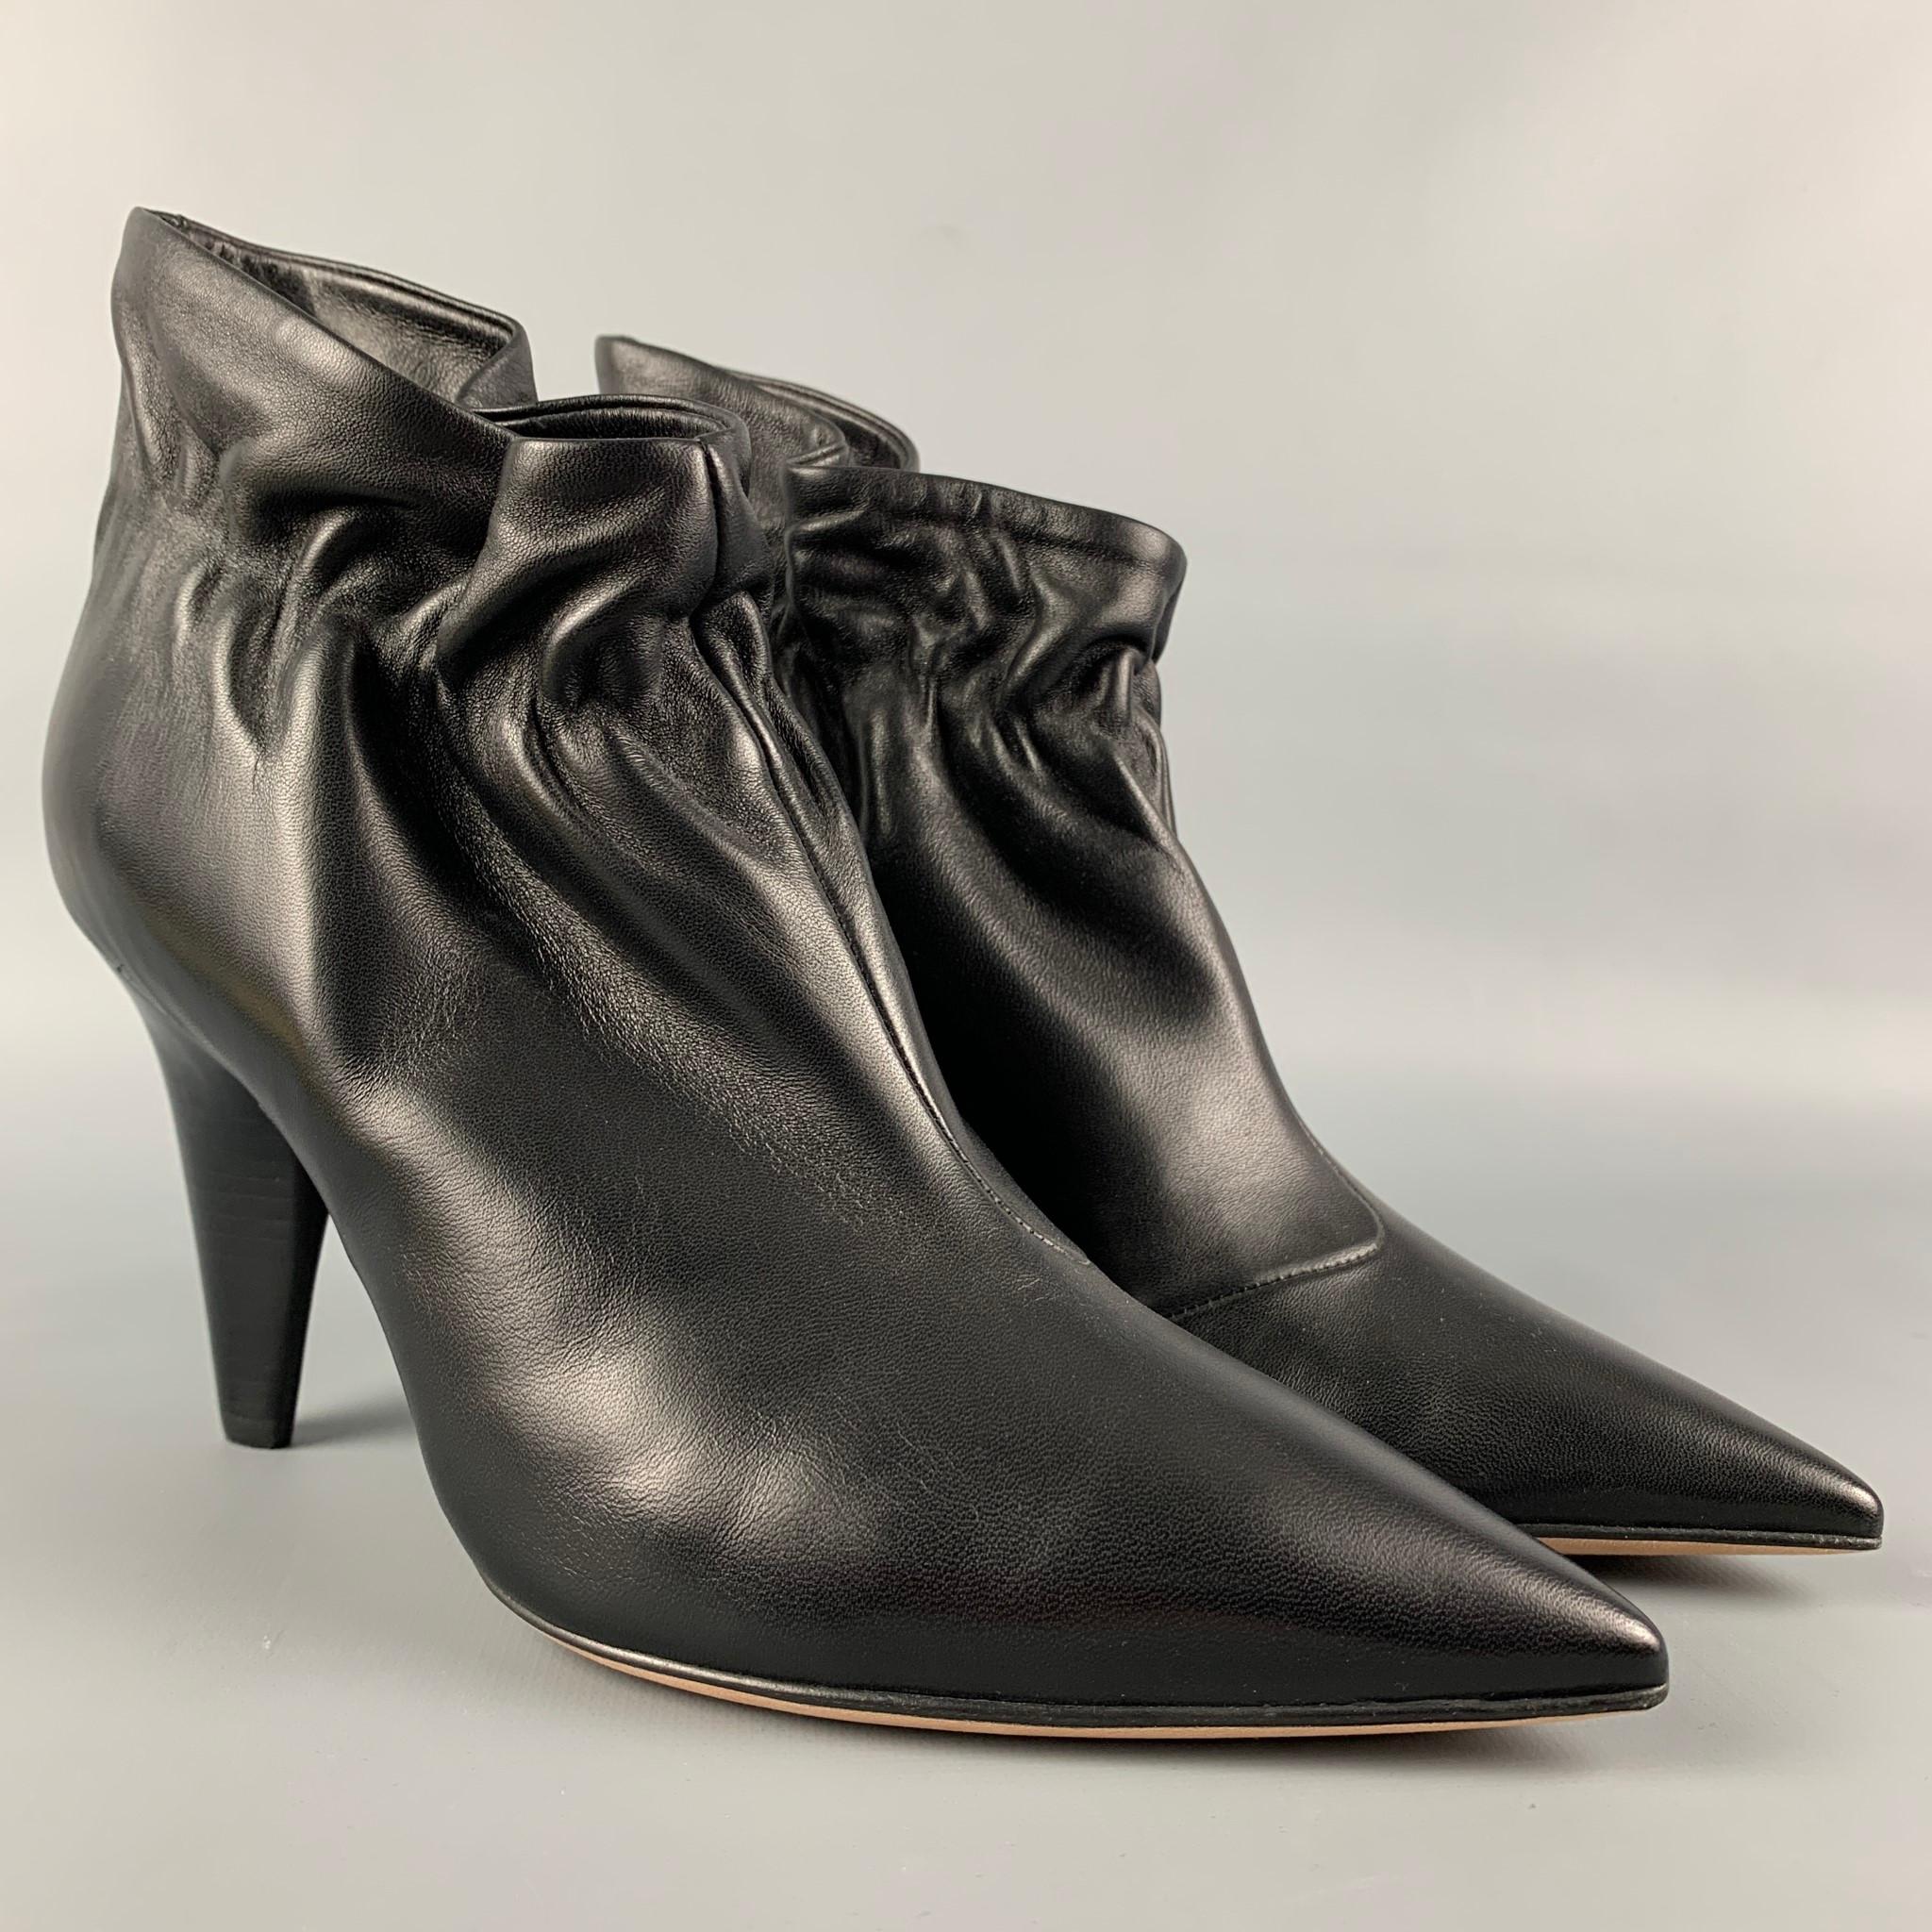 DEREK LAM boots comes in a black leather featuring a ruched style, pointed toe, and a stacked heel. Handmade in Italy.

New Without Tags. 
Marked: 37.5 in.
Original Retail Price: $795.00

Measurements:

Heel: 4 in. 